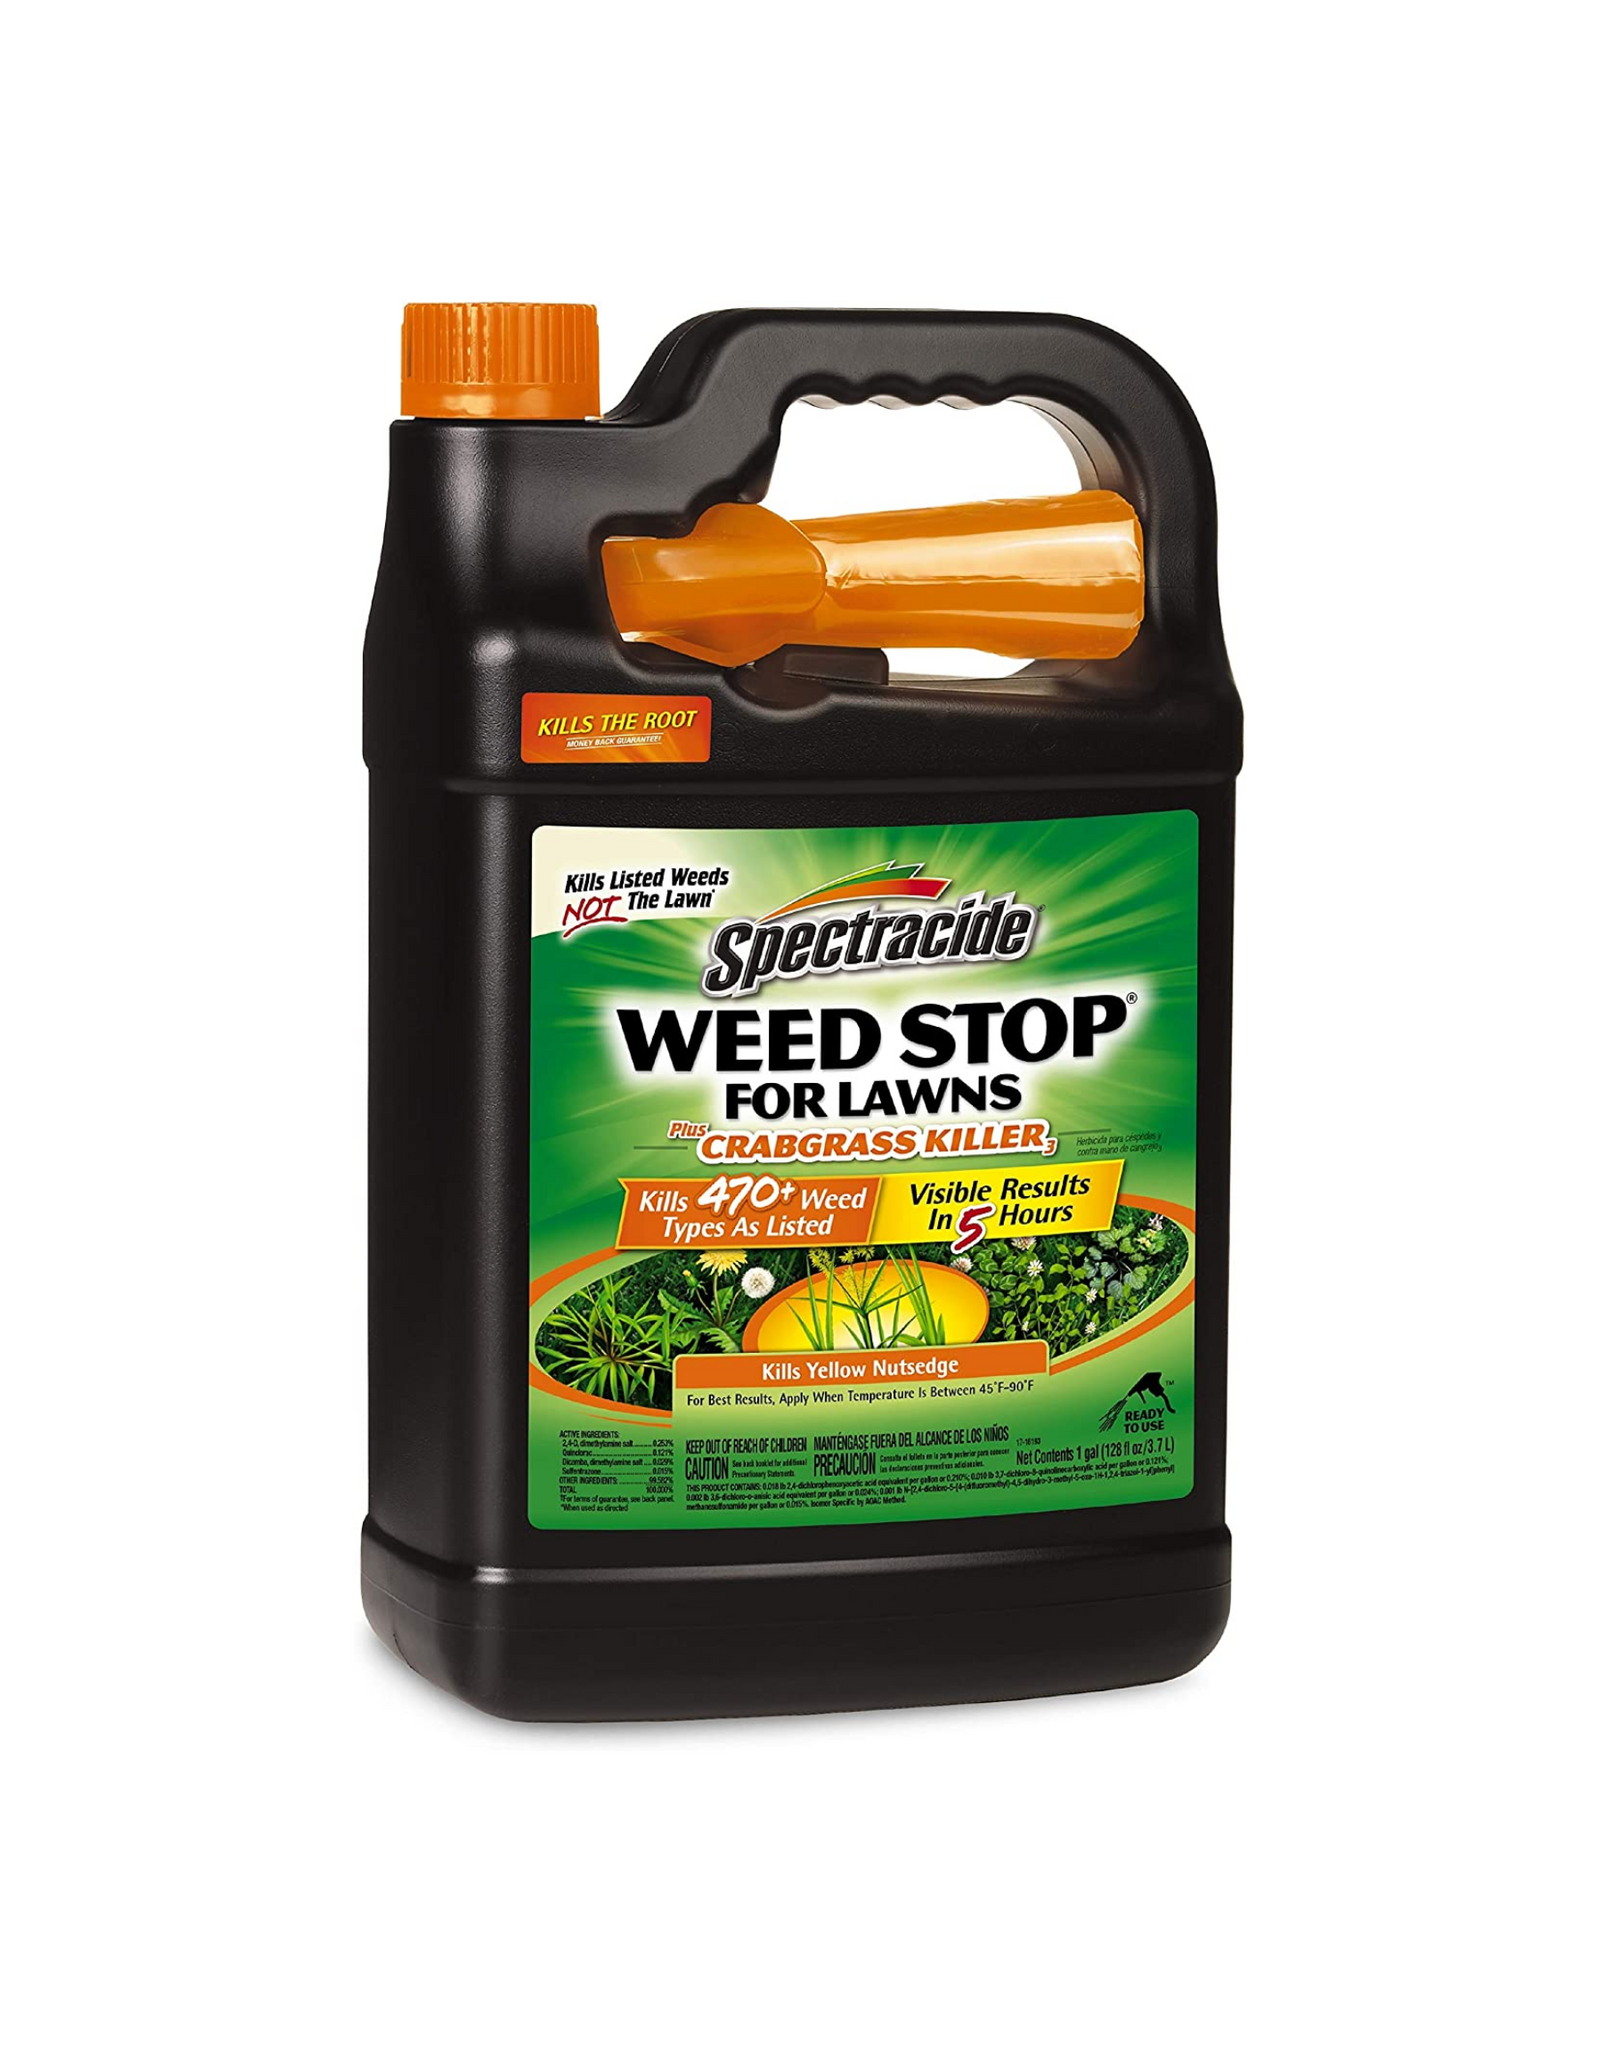 Spectracide Weed Stop For Lawns Plus Crabgrass Killer3, Visible Results In 5 Hours, 1 Gal